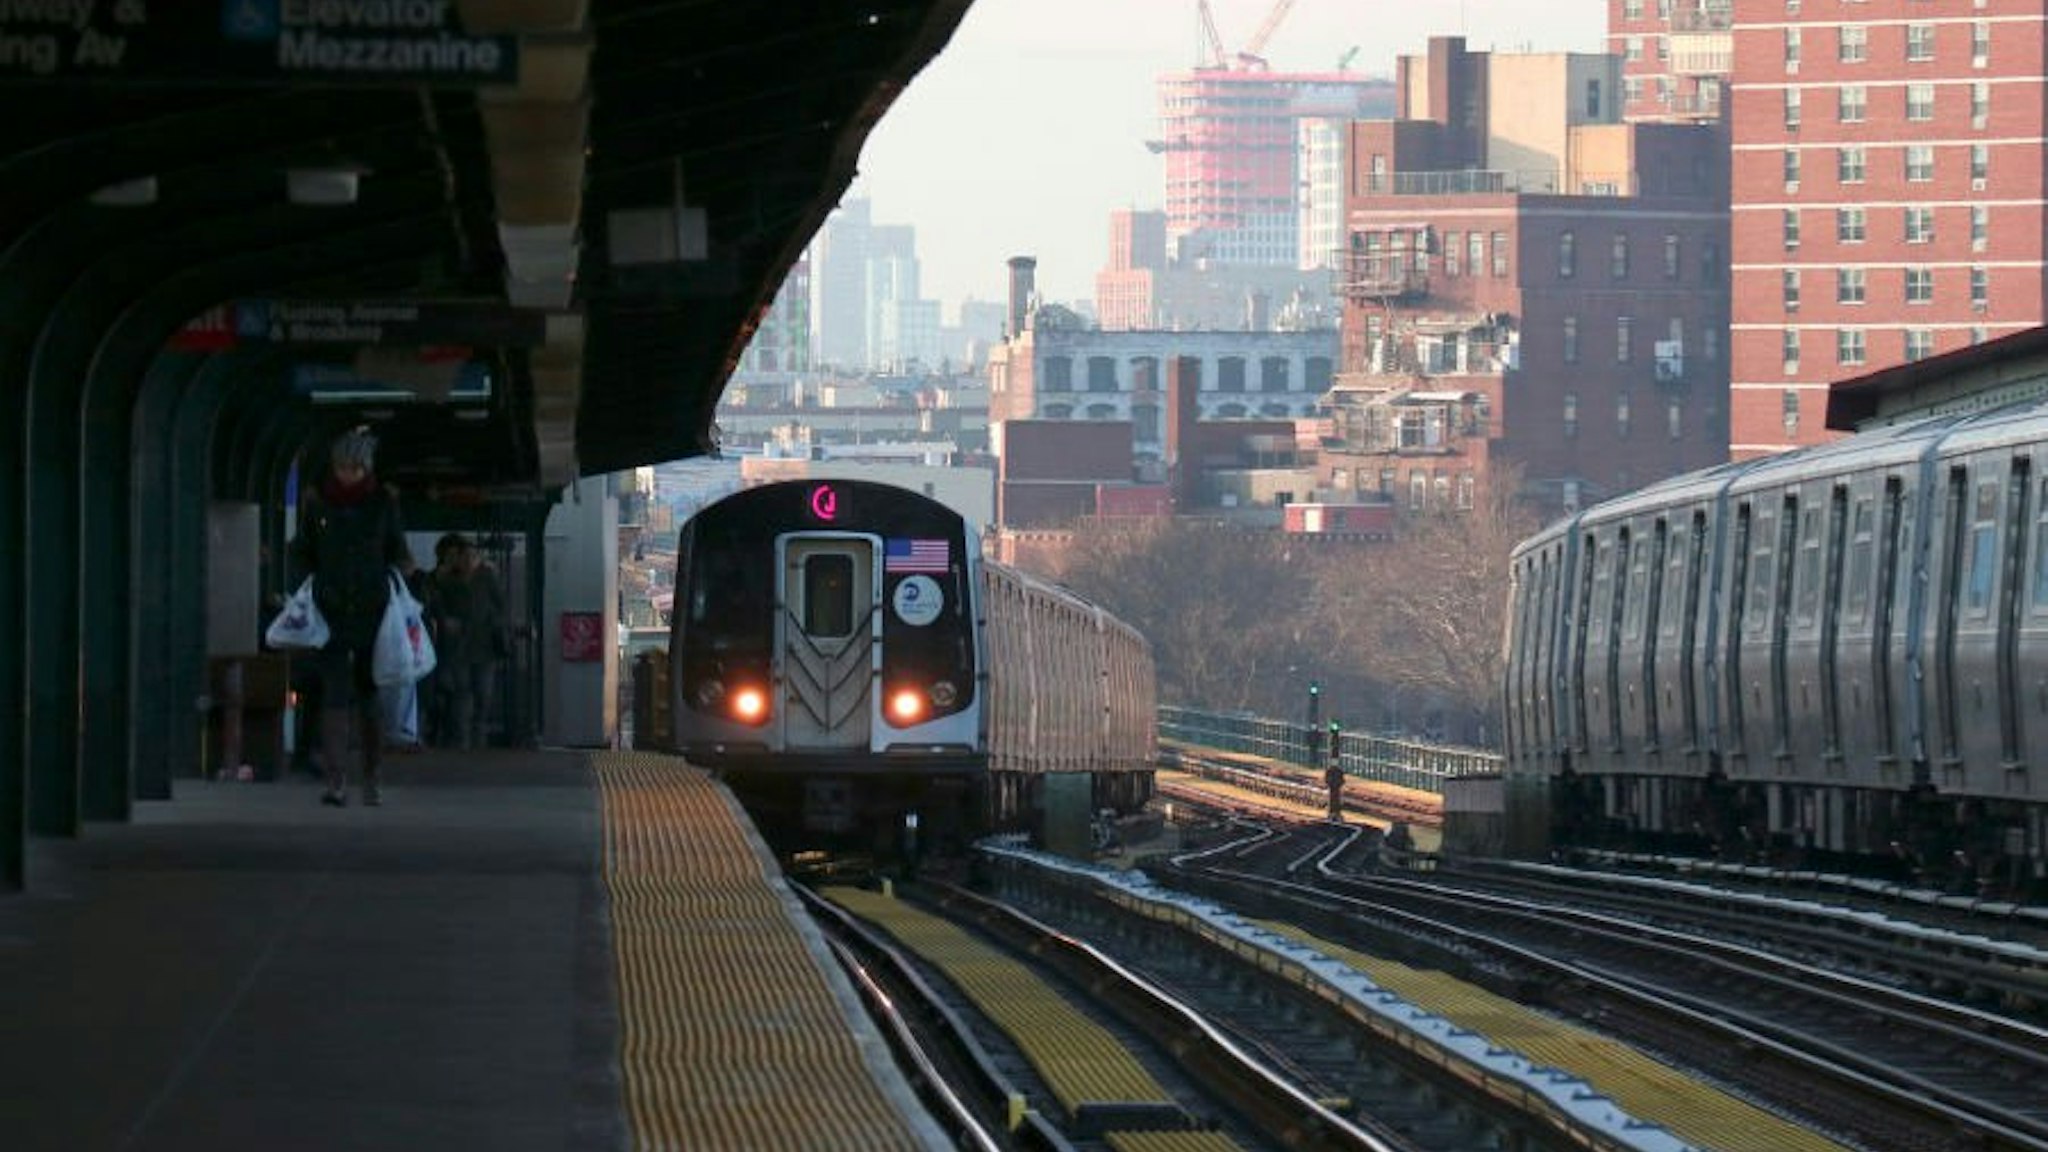 A subway train pulls into the Flushing Avenue station in Brooklyn on February 2, 2019 in New York City.